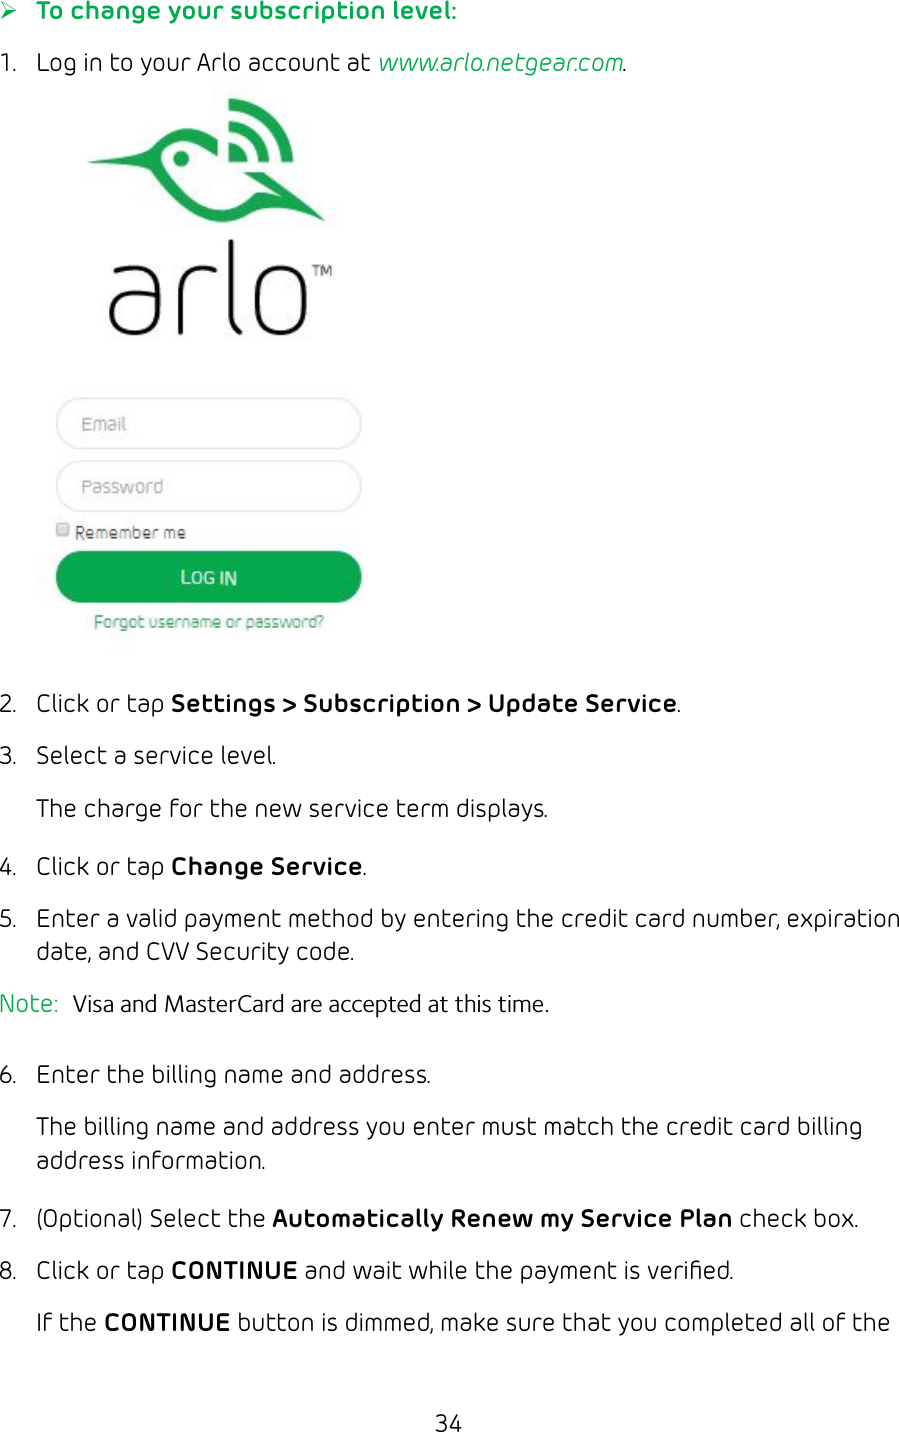 34 ¾To change your subscription level:1.  Log in to your Arlo account at www.arlo.netgear.com.2.  Click or tap Settings &gt; Subscription &gt; Update Service.3.  Select a service level. The charge for the new service term displays.4.  Click or tap Change Service.5.  Enter a valid payment method by entering the credit card number, expiration date, and CVV Security code.Note:  Visa and MasterCard are accepted at this time. 6.  Enter the billing name and address.The billing name and address you enter must match the credit card billing address information.7.  (Optional) Select the Automatically Renew my Service Plan check box. 8.  Click or tap CONTINUE and wait while the payment is veriﬁed.If the CONTINUE button is dimmed, make sure that you completed all of the 